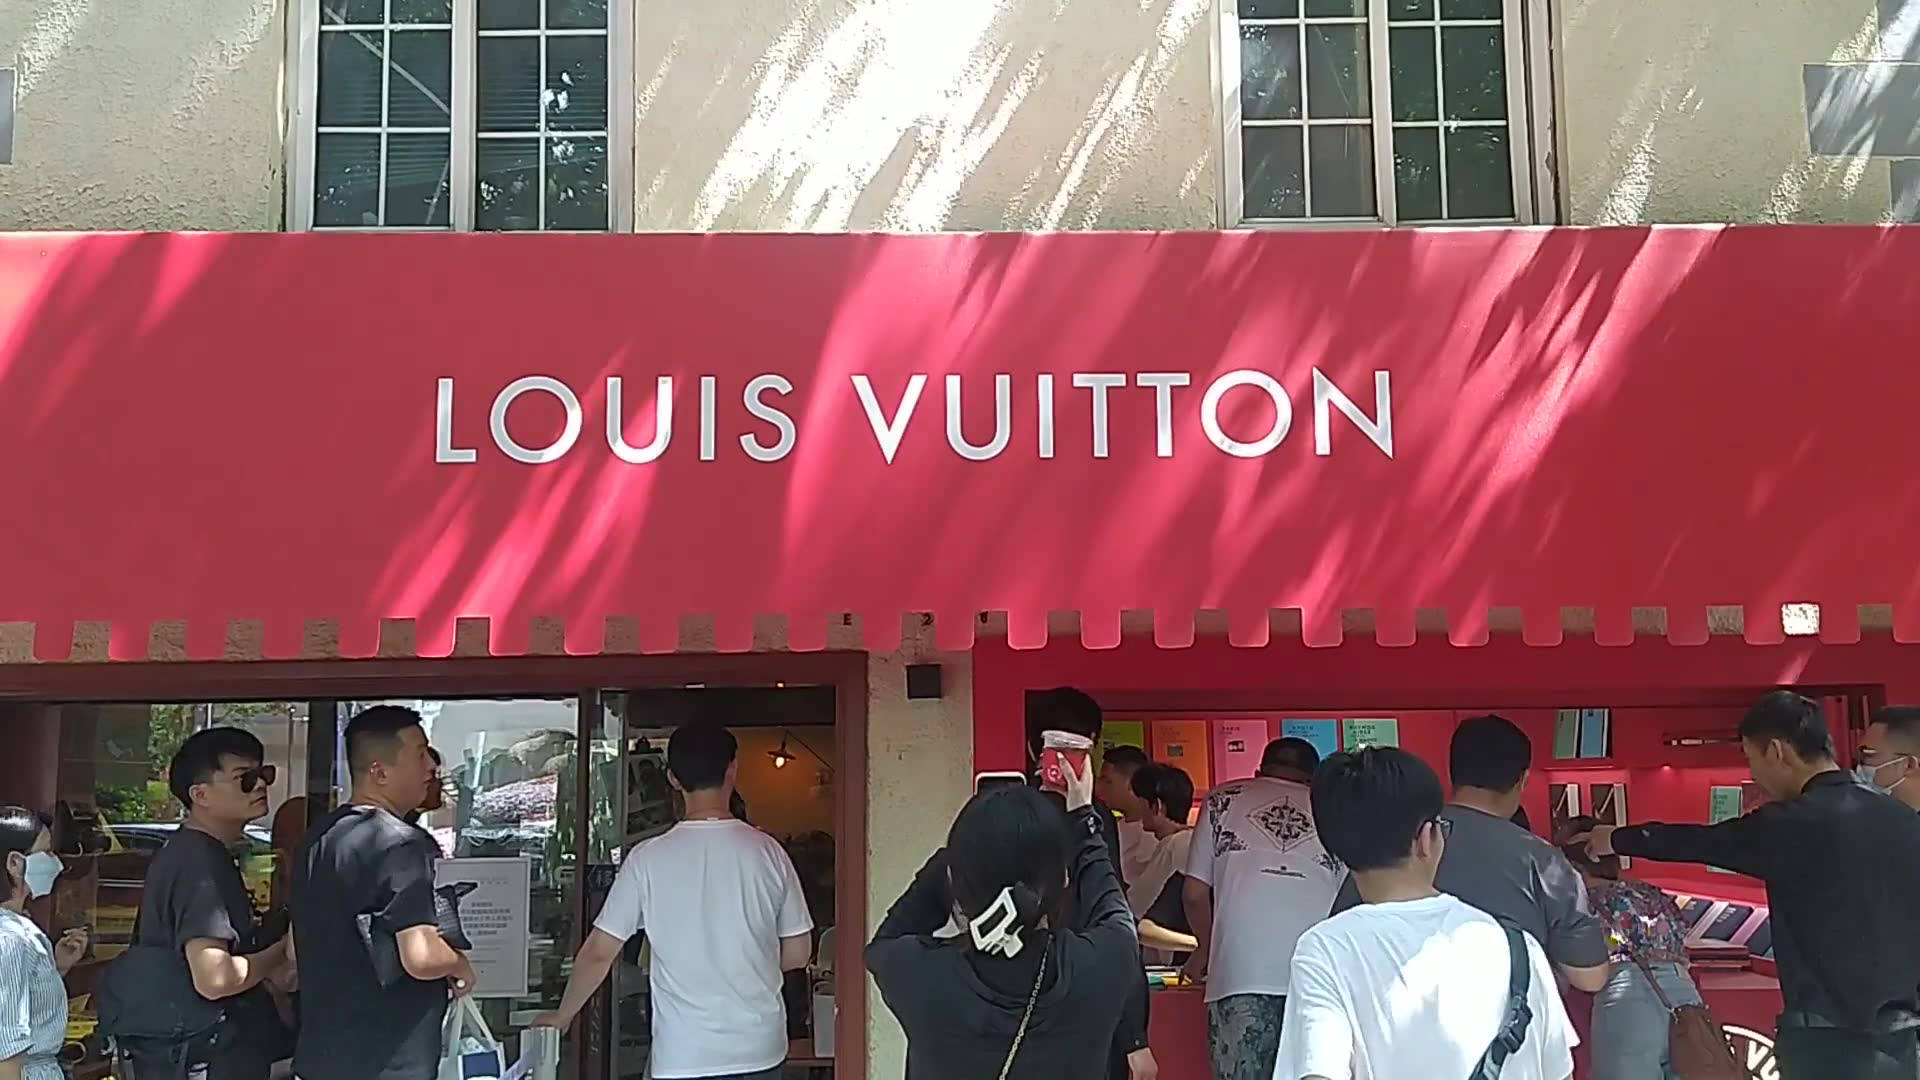 I visited the Louis Vuitton pop-up store so that you don't have to